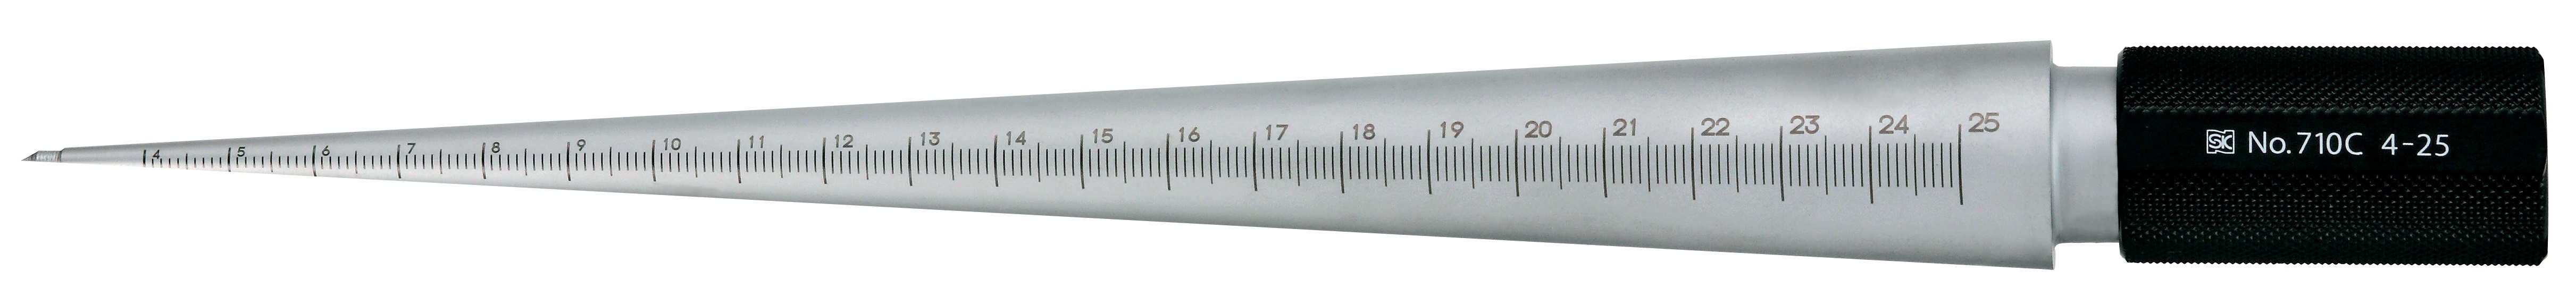 Cylindrical Taper Gauge Silver Finish